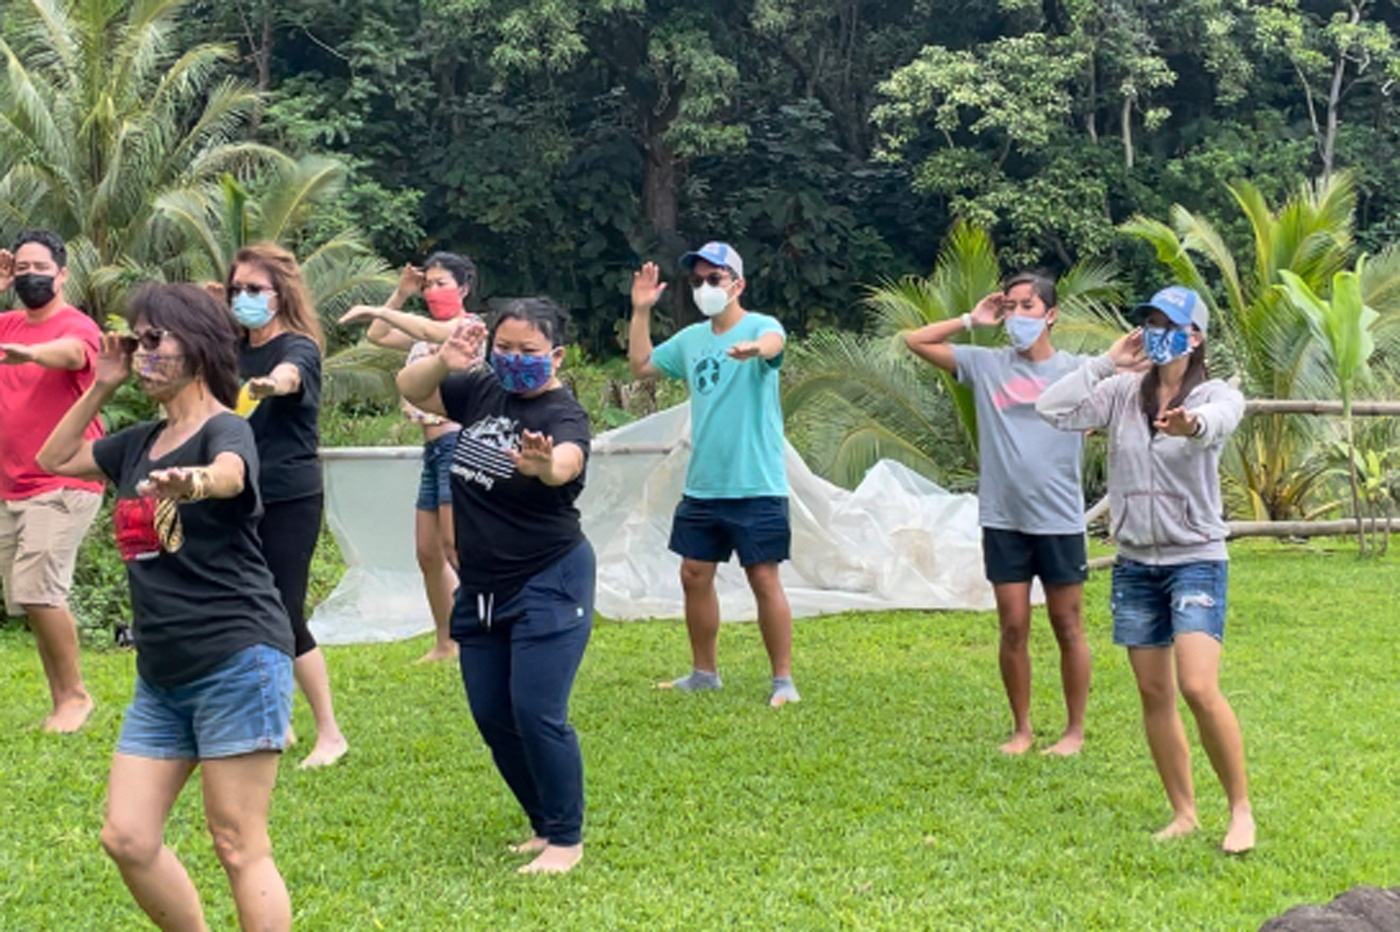 Volunteering is a reciprocal relationship between the cohort fellows and the volunteer partner organization with each getting to share their skills and cultures. M&S volunteers were lucky enough to join an impromptu hula lesson with world-renowned kumu hula, Vicky Holt Takamine.